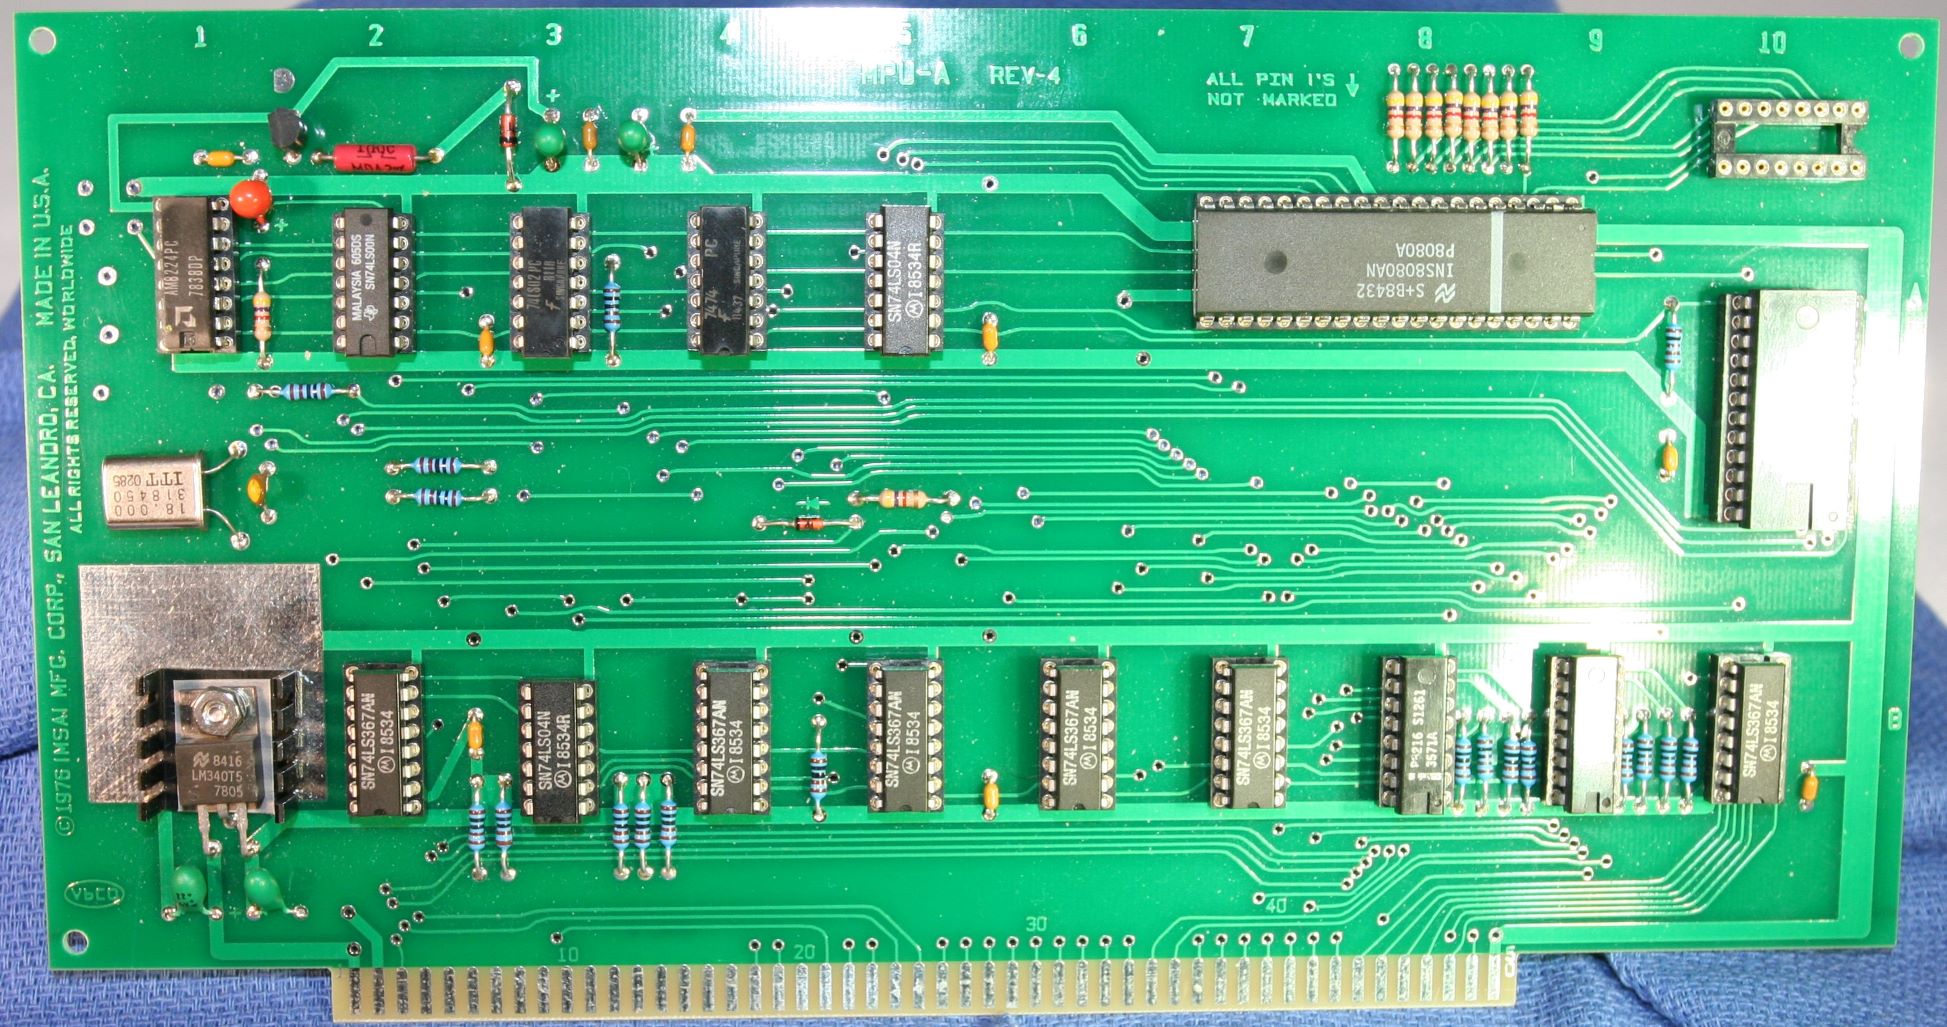 MITS Altair 8800 16MCS 16K Static RAM Card bare pcb reproduction